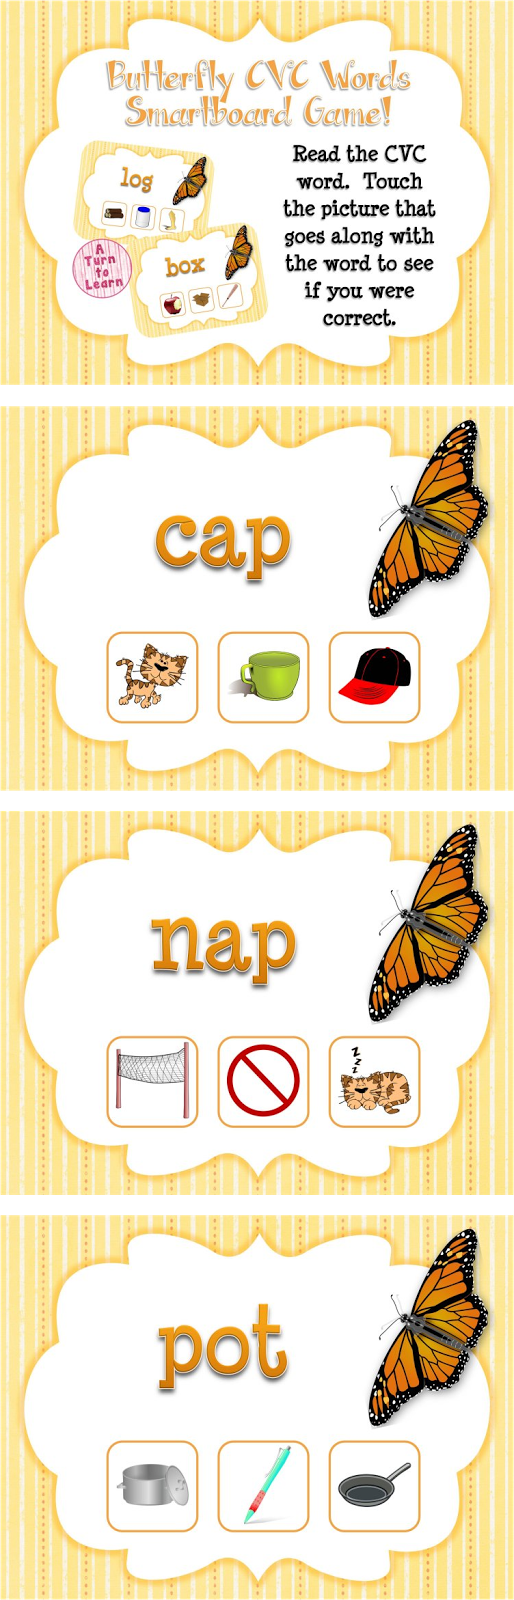 Butterfly Themed CVC Words Game for Smartboard or Promethean Board!